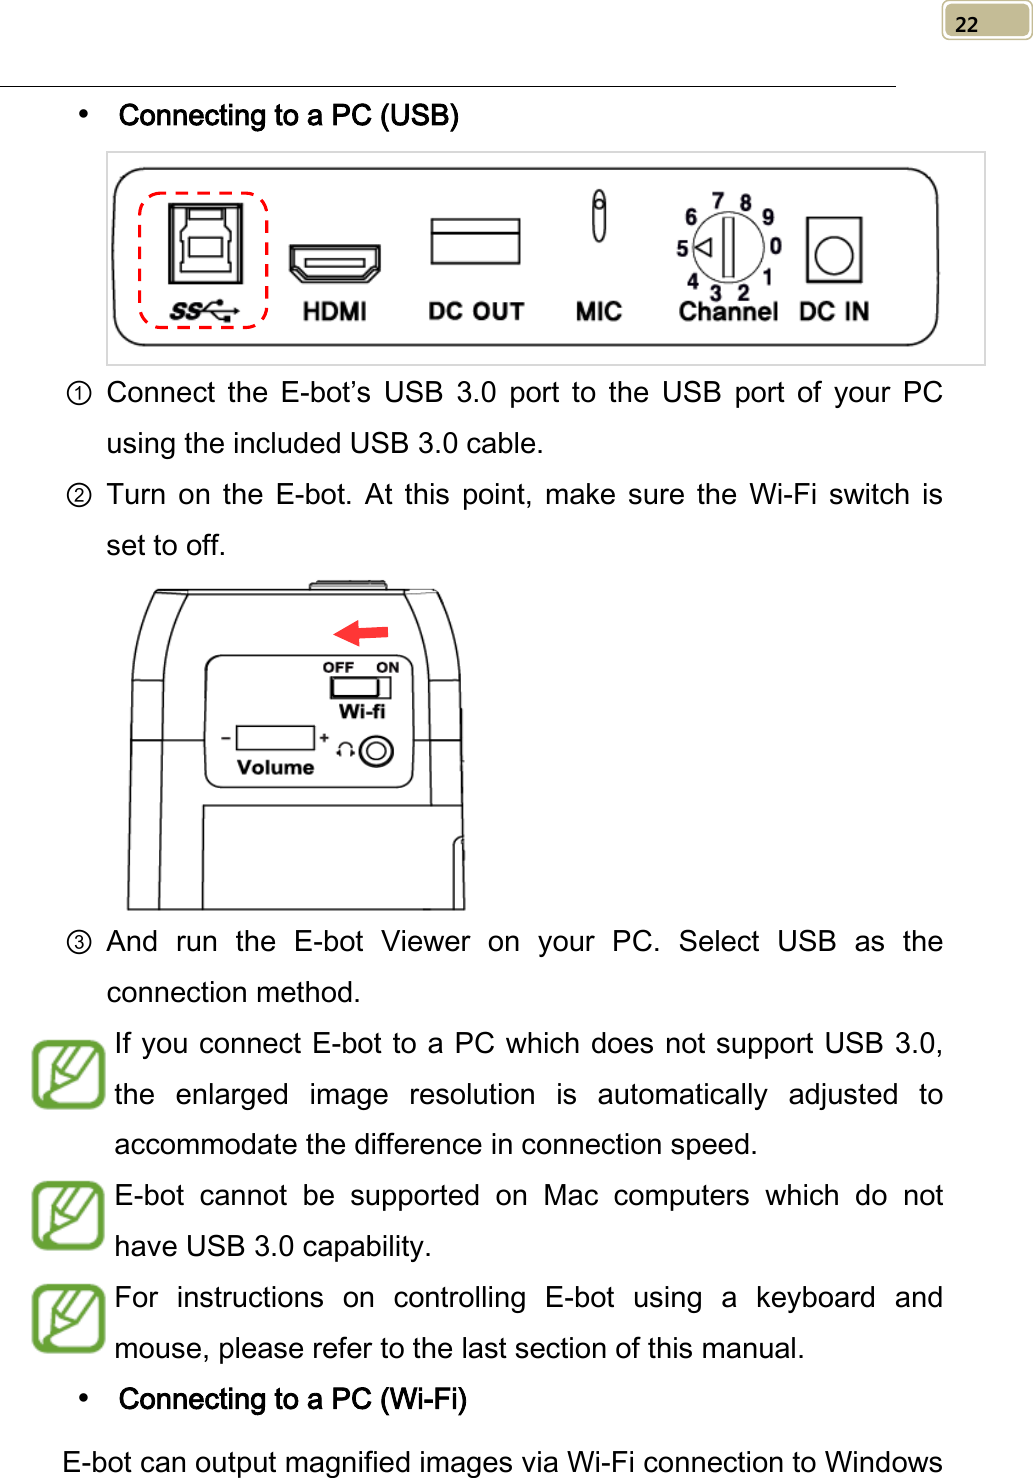   22  Connecting to a PC (USB)  ① Connect the E-bot’s USB 3.0 port to the  USB port of your  PC using the included USB 3.0 cable. ② Turn on the E-bot.  At this point, make sure the Wi-Fi switch is set to off.  ③ And run the E-bot Viewer on your PC.  Select  USB as the connection method. If you connect E-bot to a PC which does not support USB 3.0, the  enlarged image resolution is automatically adjusted to accommodate the difference in connection speed.   E-bot cannot be supported on Mac computers which do not have USB 3.0 capability. For instructions on controlling E-bot using a keyboard and mouse, please refer to the last section of this manual.  Connecting to a PC (Wi-Fi) E-bot can output magnified images via Wi-Fi connection to Windows 